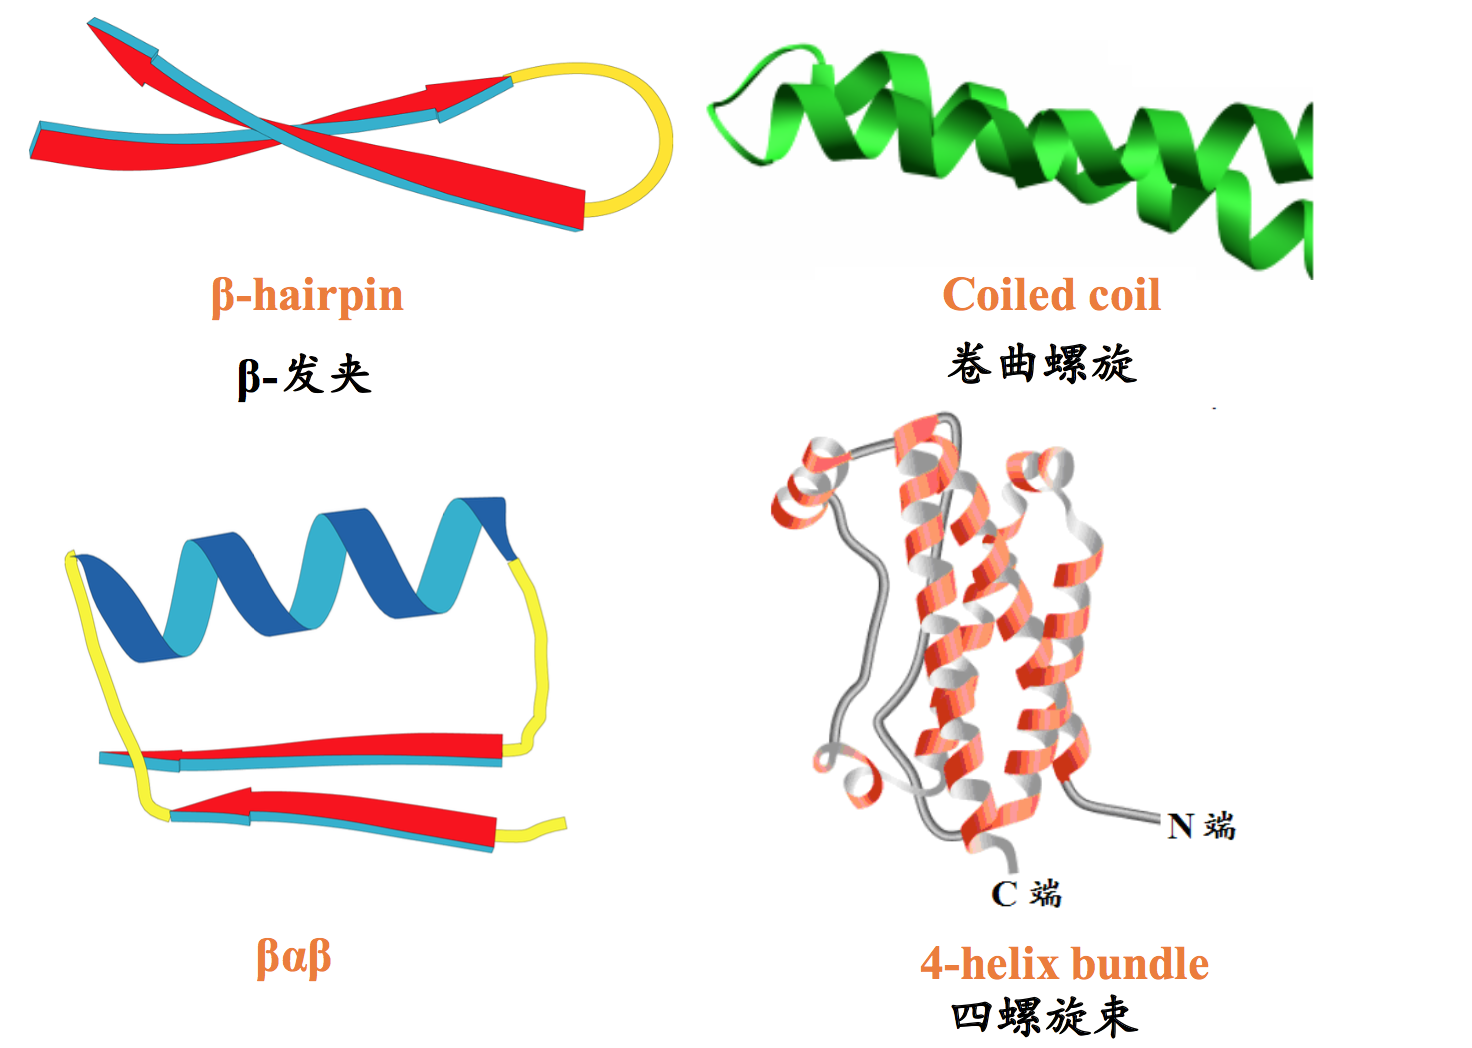 Tertiary Structure Of Protein - Solved: PART A The Tertiary Structure Of A Protein Is A Co ... / Protein structures refer to a condensation of amino acids which forms peptide bonds.